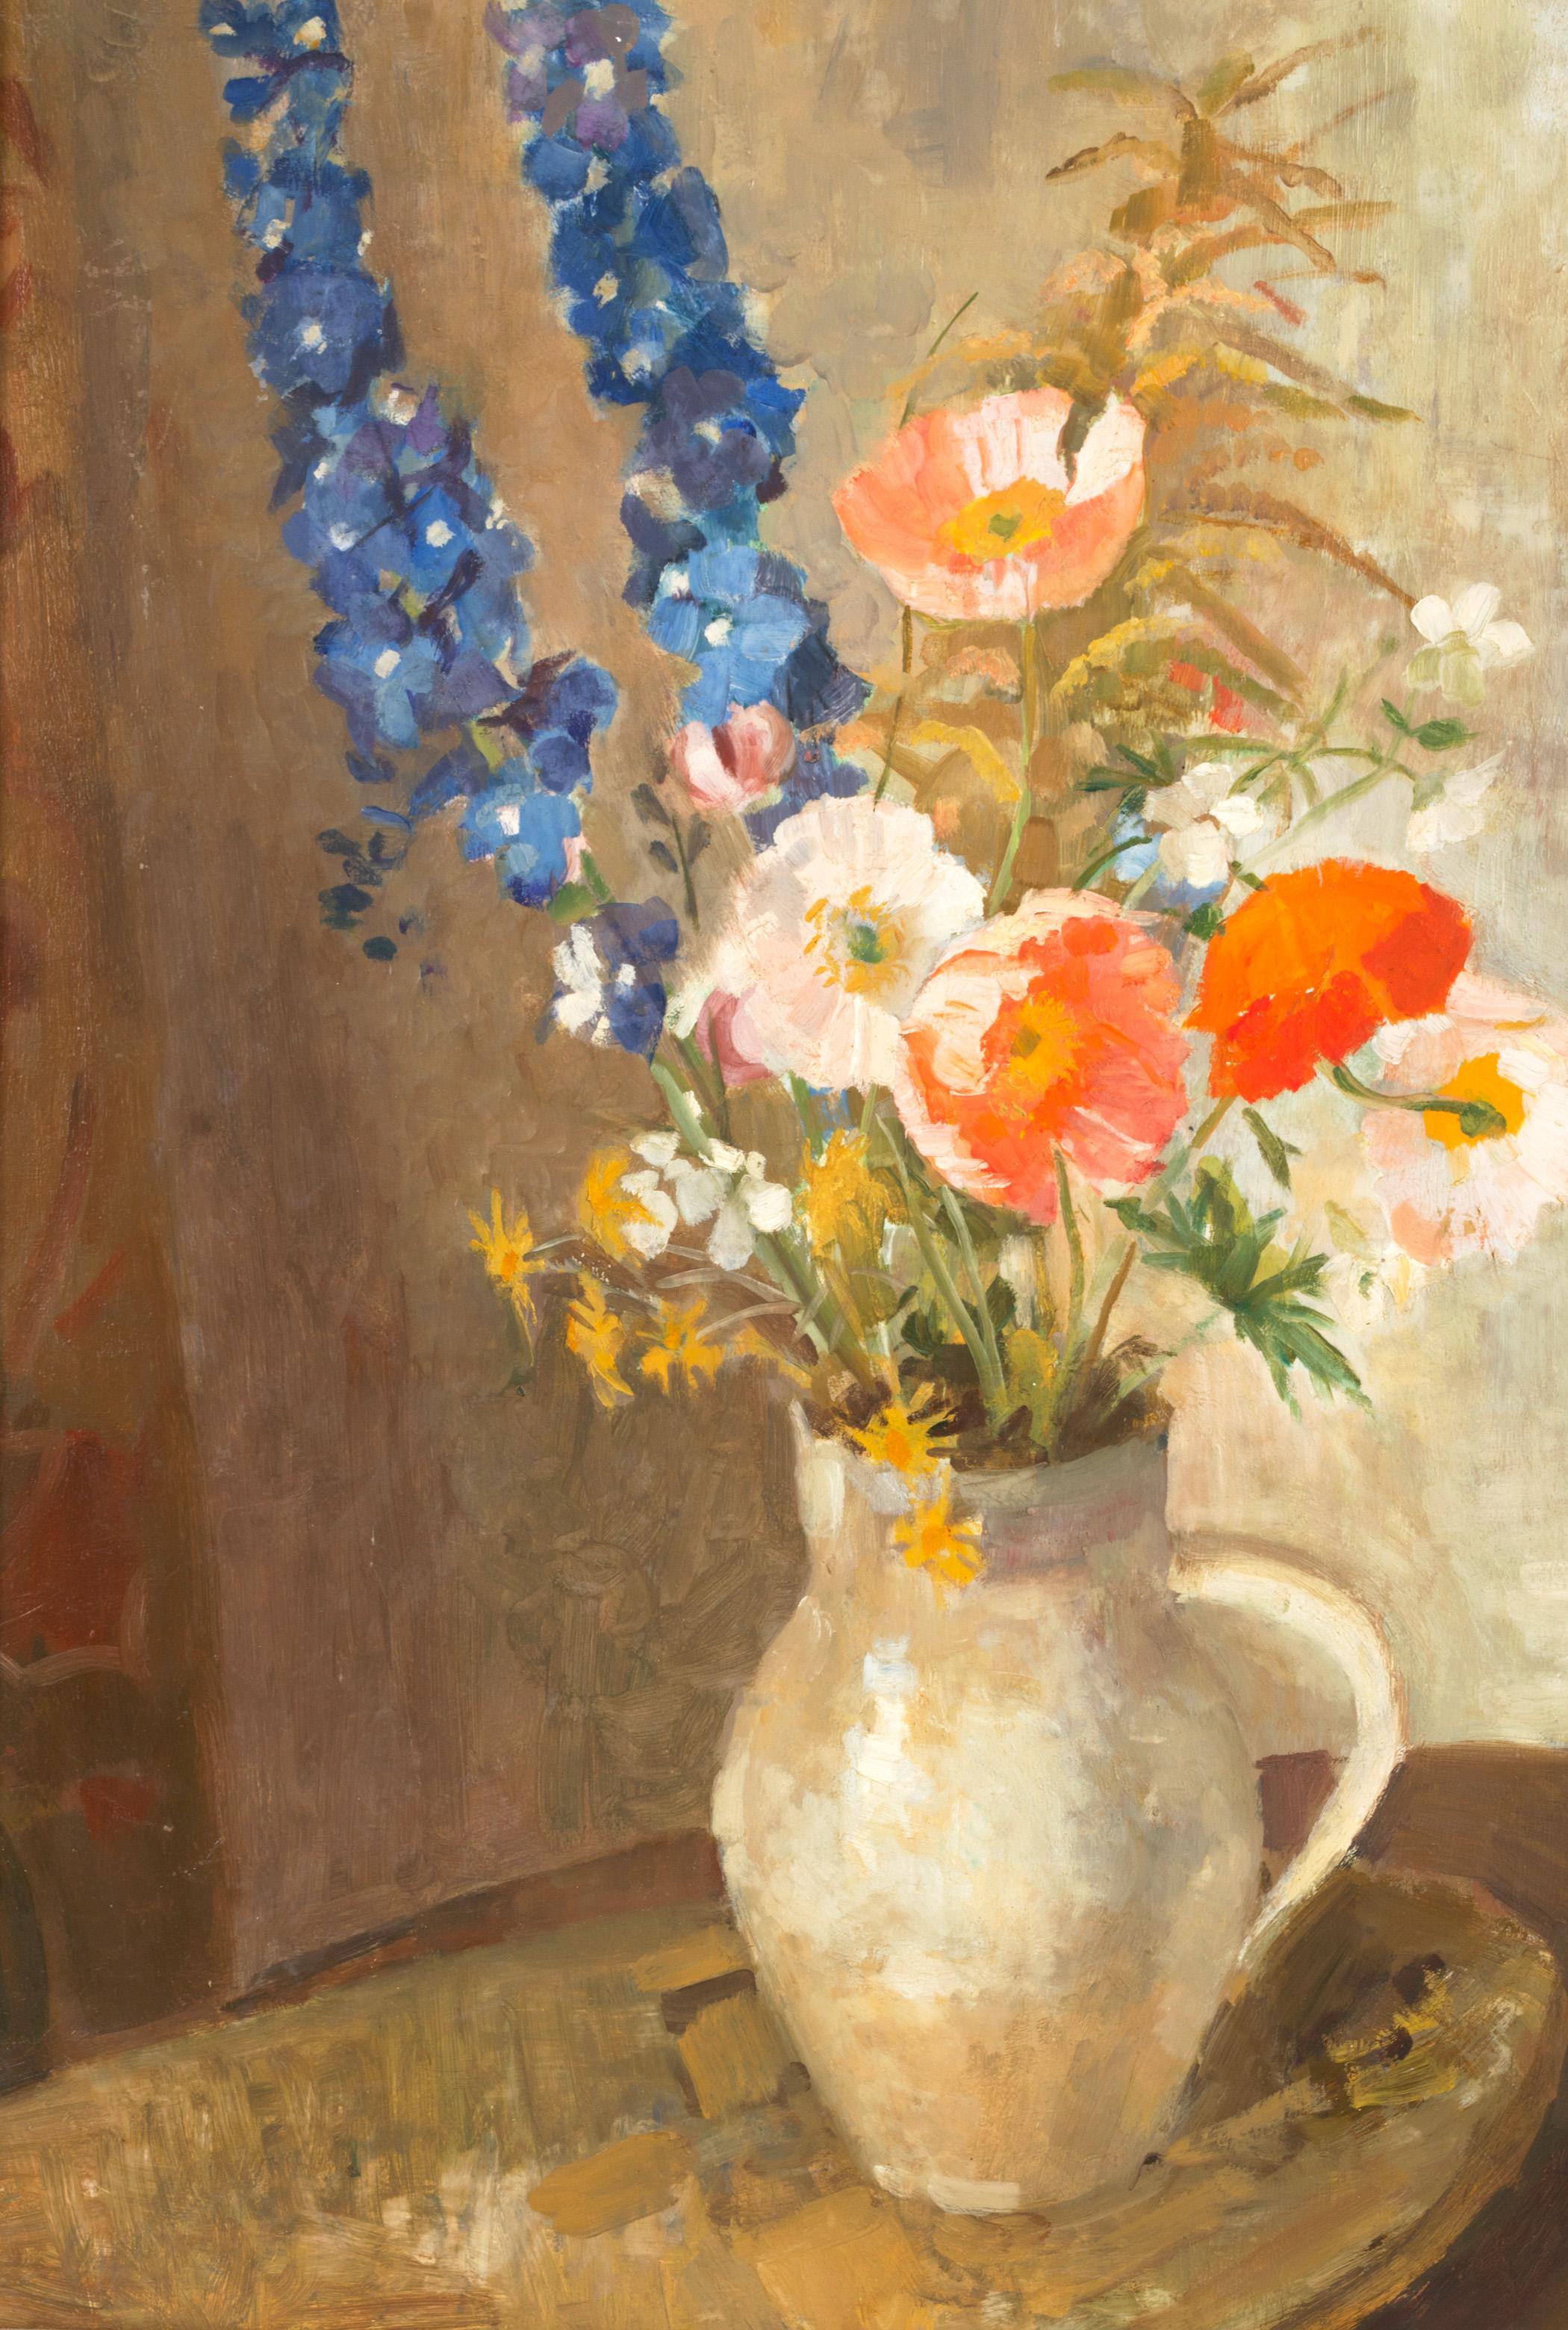 A delicate English School still life study by the listed British artist Lilian Buchanan (1914-2004).
An oil on board depicting a jug of vibrant poppies and hyacinths. Signed in the lower right hand corner C.1970.

Framed.
Provenance: Private